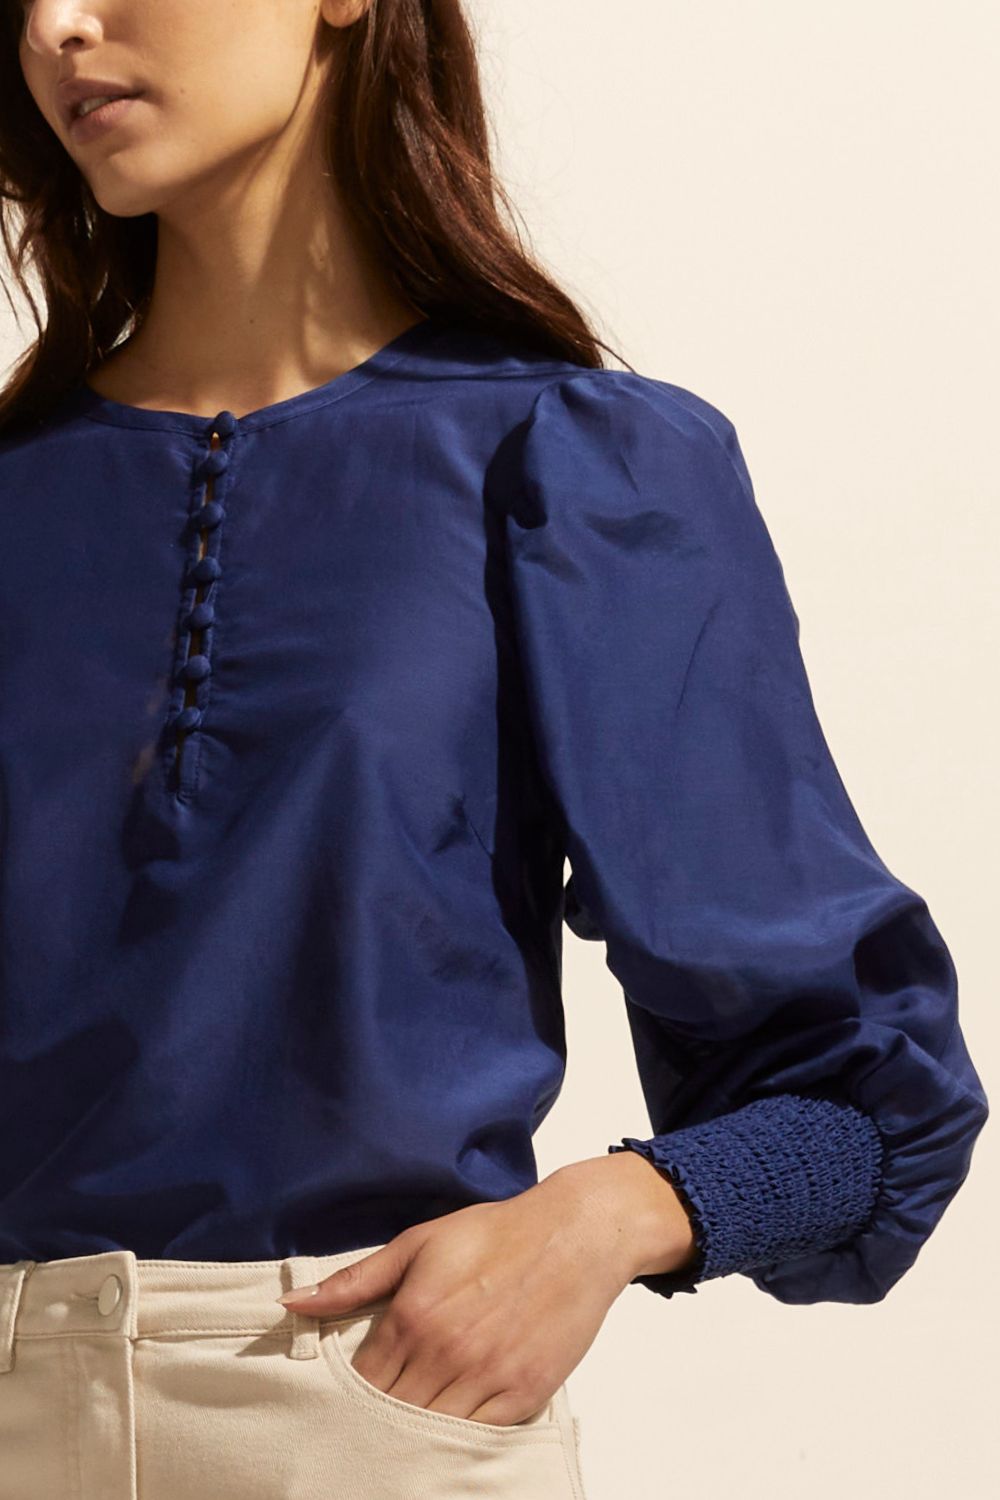 slate blue, blue, top, long sleeve, shirred cuffs, blouson sleeve, covered buttons round neckline, detail image